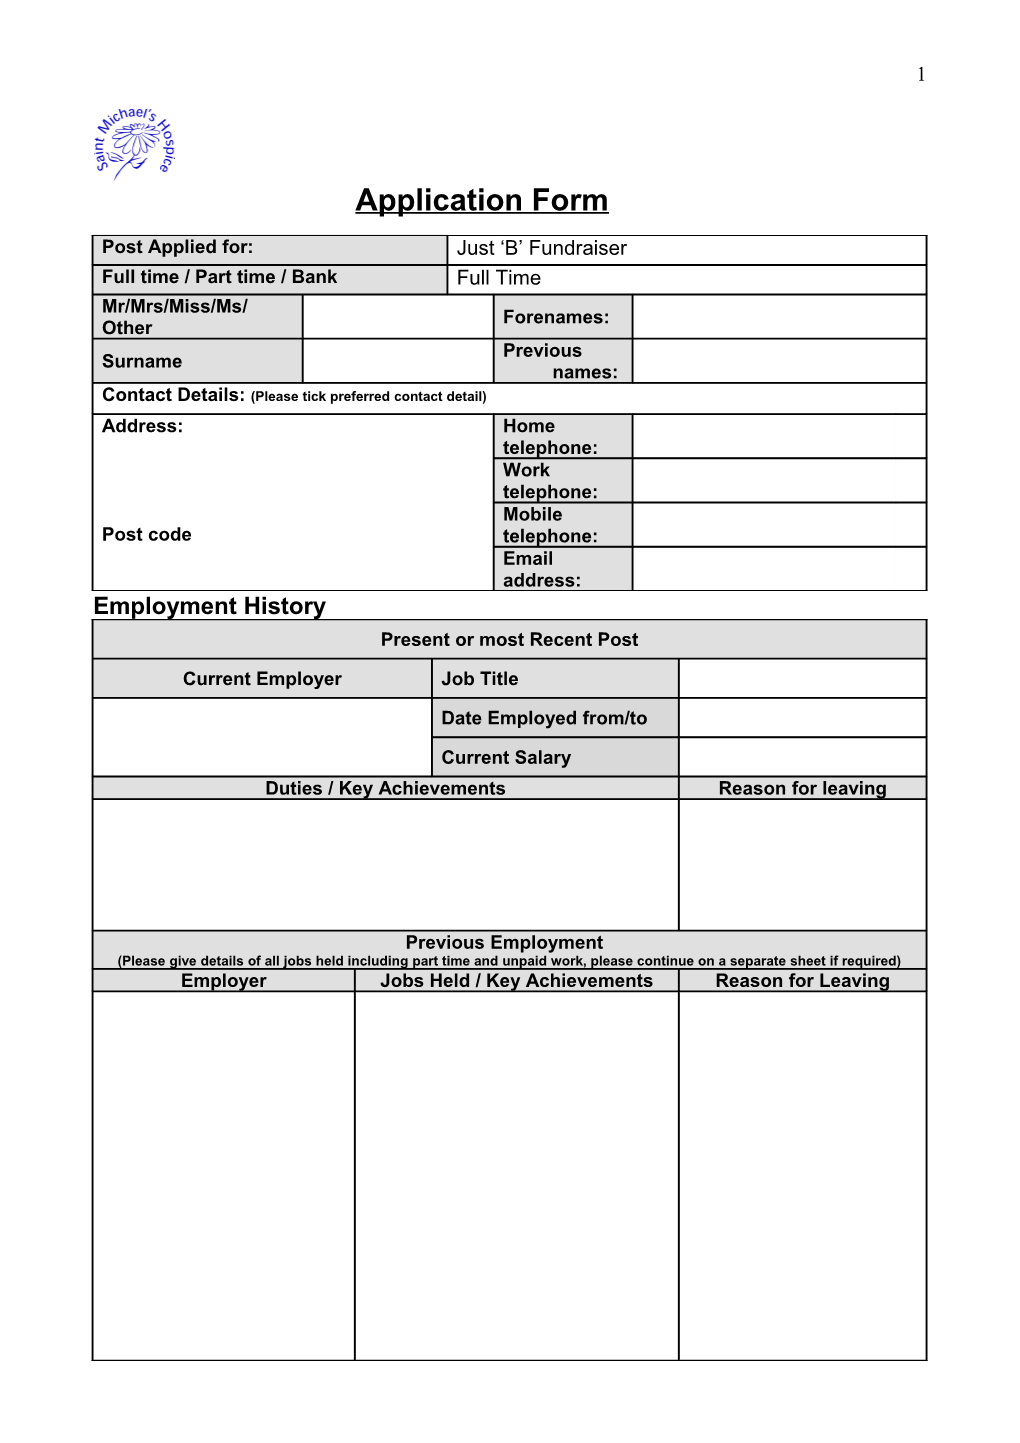 Application Form s26